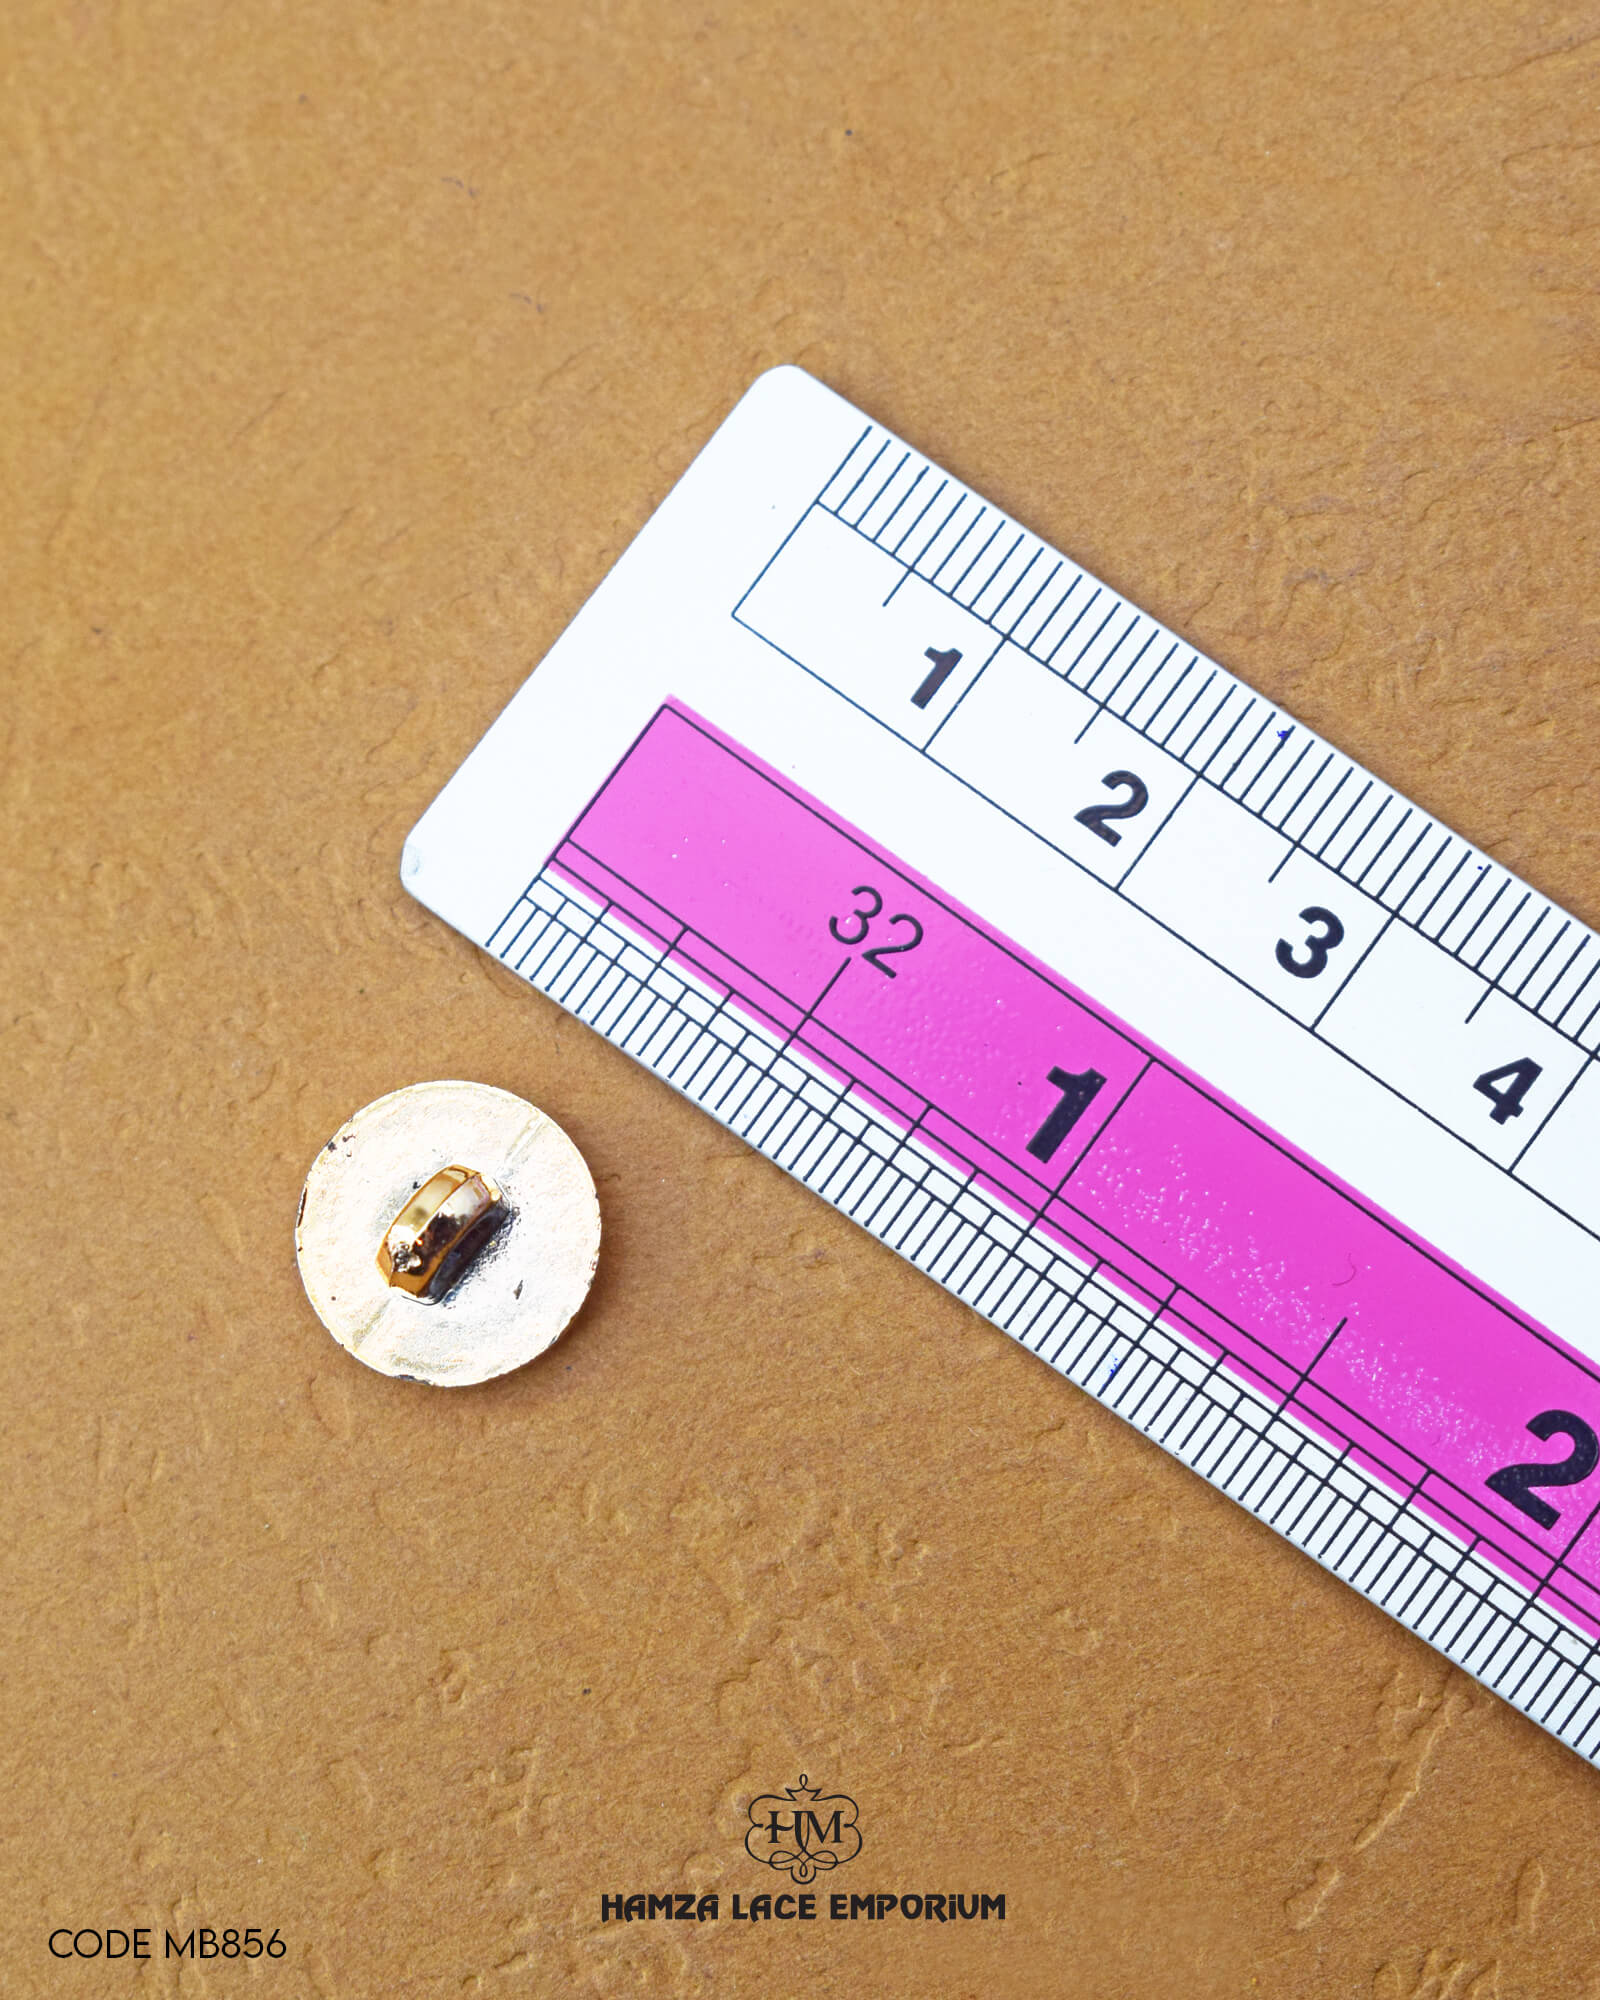 Size of the 'Metal Button MB856' is given with the help of a ruler